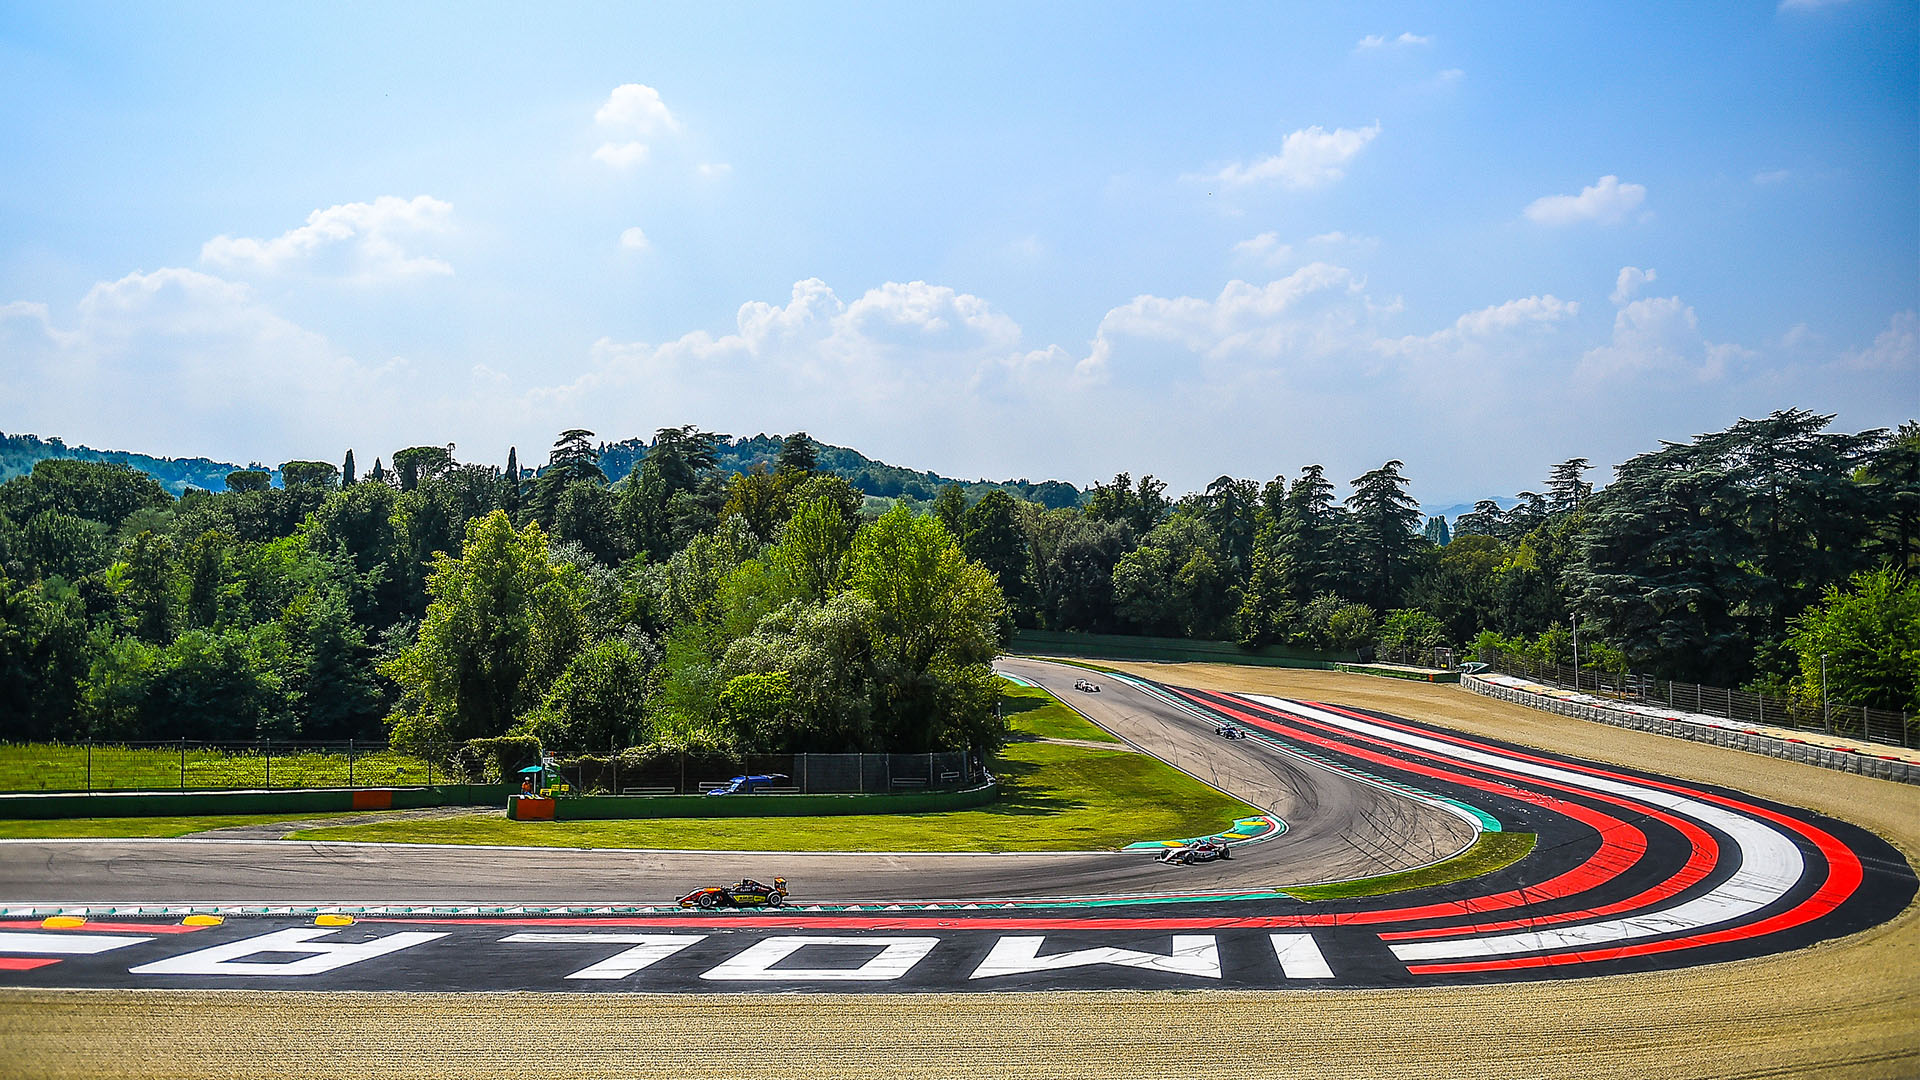 Ingenieurs Raadplegen staart How will the two-day format for the Emilia Romagna GP at Imola be different  to normal race weekends? | Formula 1®